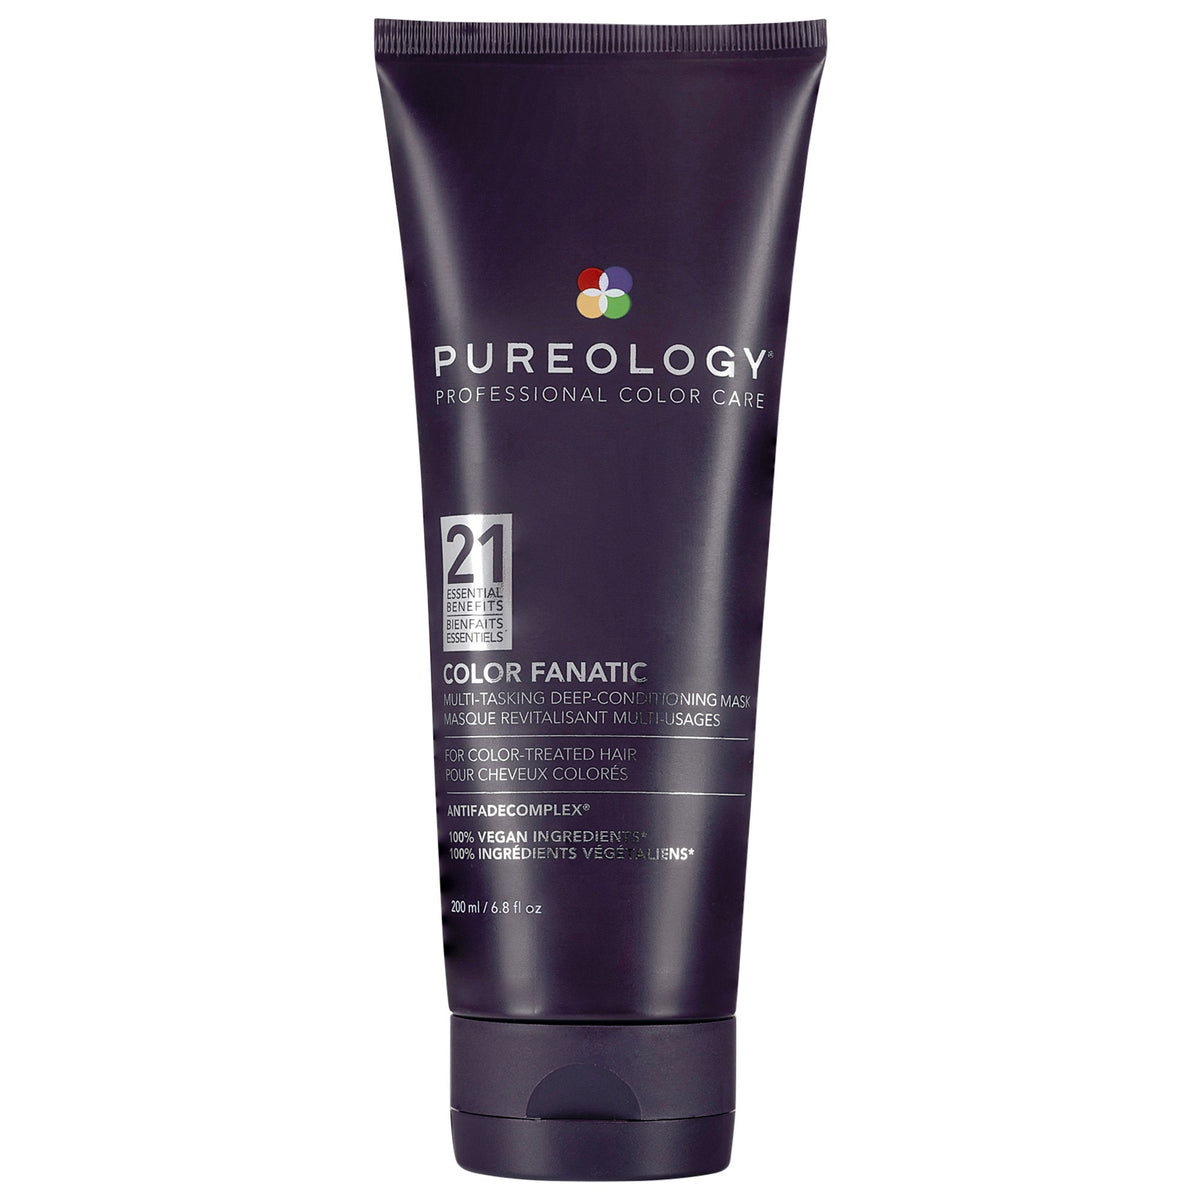 Pureology Color Fanatic Multi-Tasking Deep-Conditioning Hair Mask 200ml